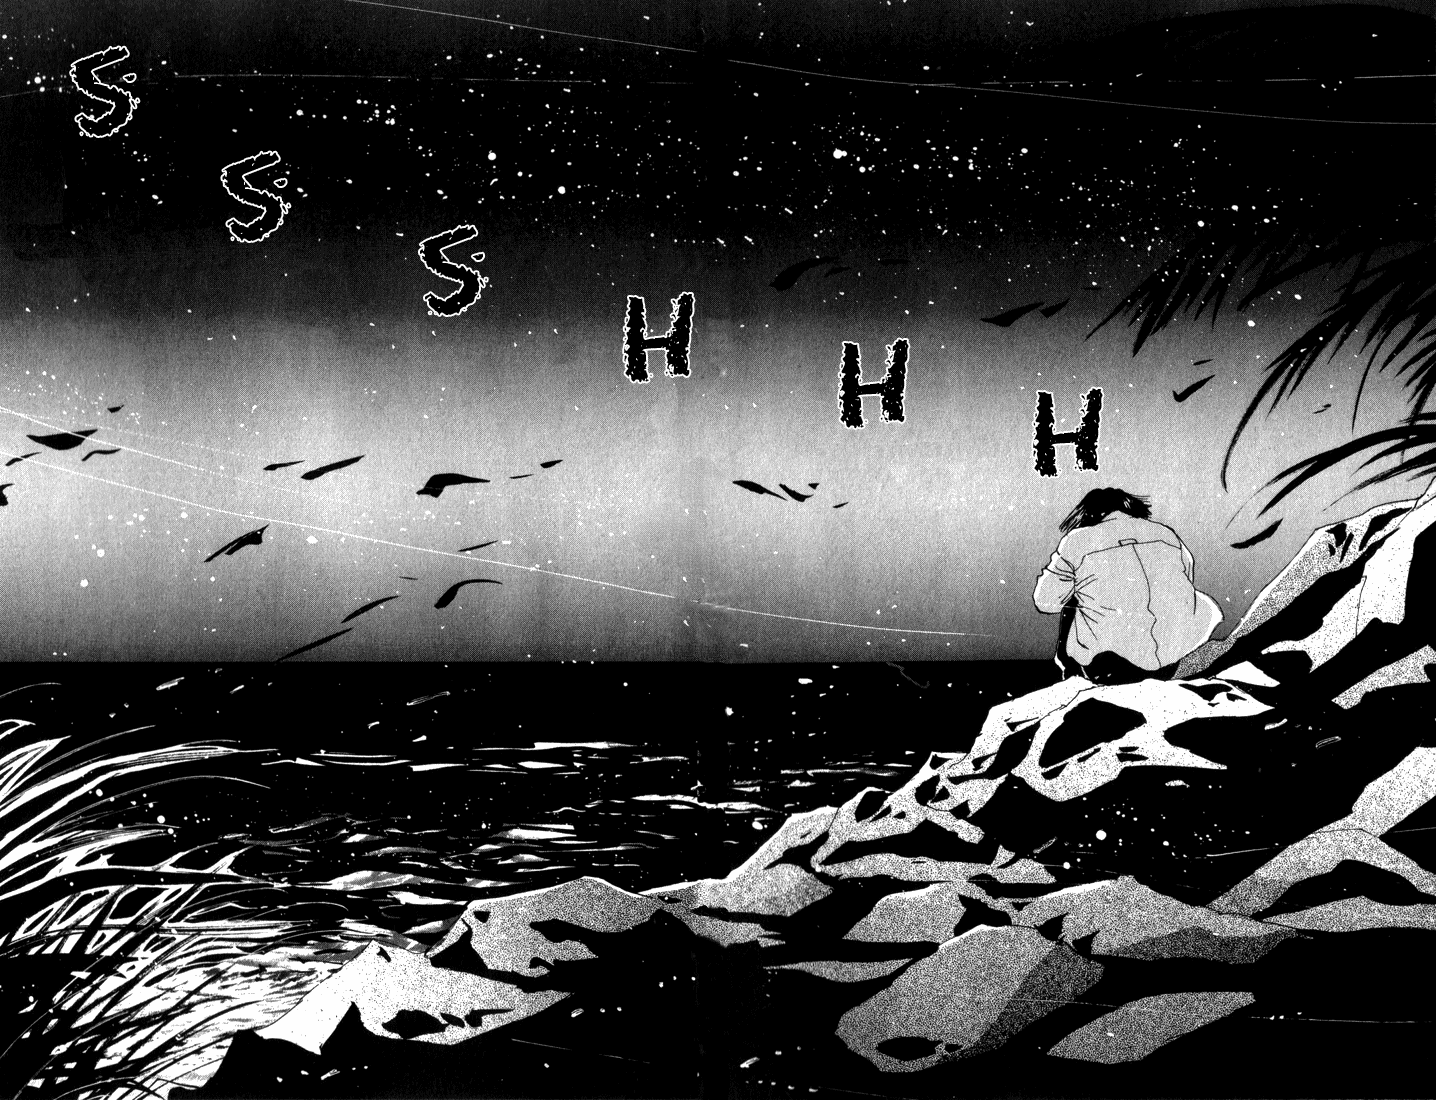 Manga panel showing a lone figure sitting on some rocks by the water. The sky and ocean are dark and the wind is blowing, with a 'ssshhh' sound effect. The panel conveys a sense of deep loneliness.